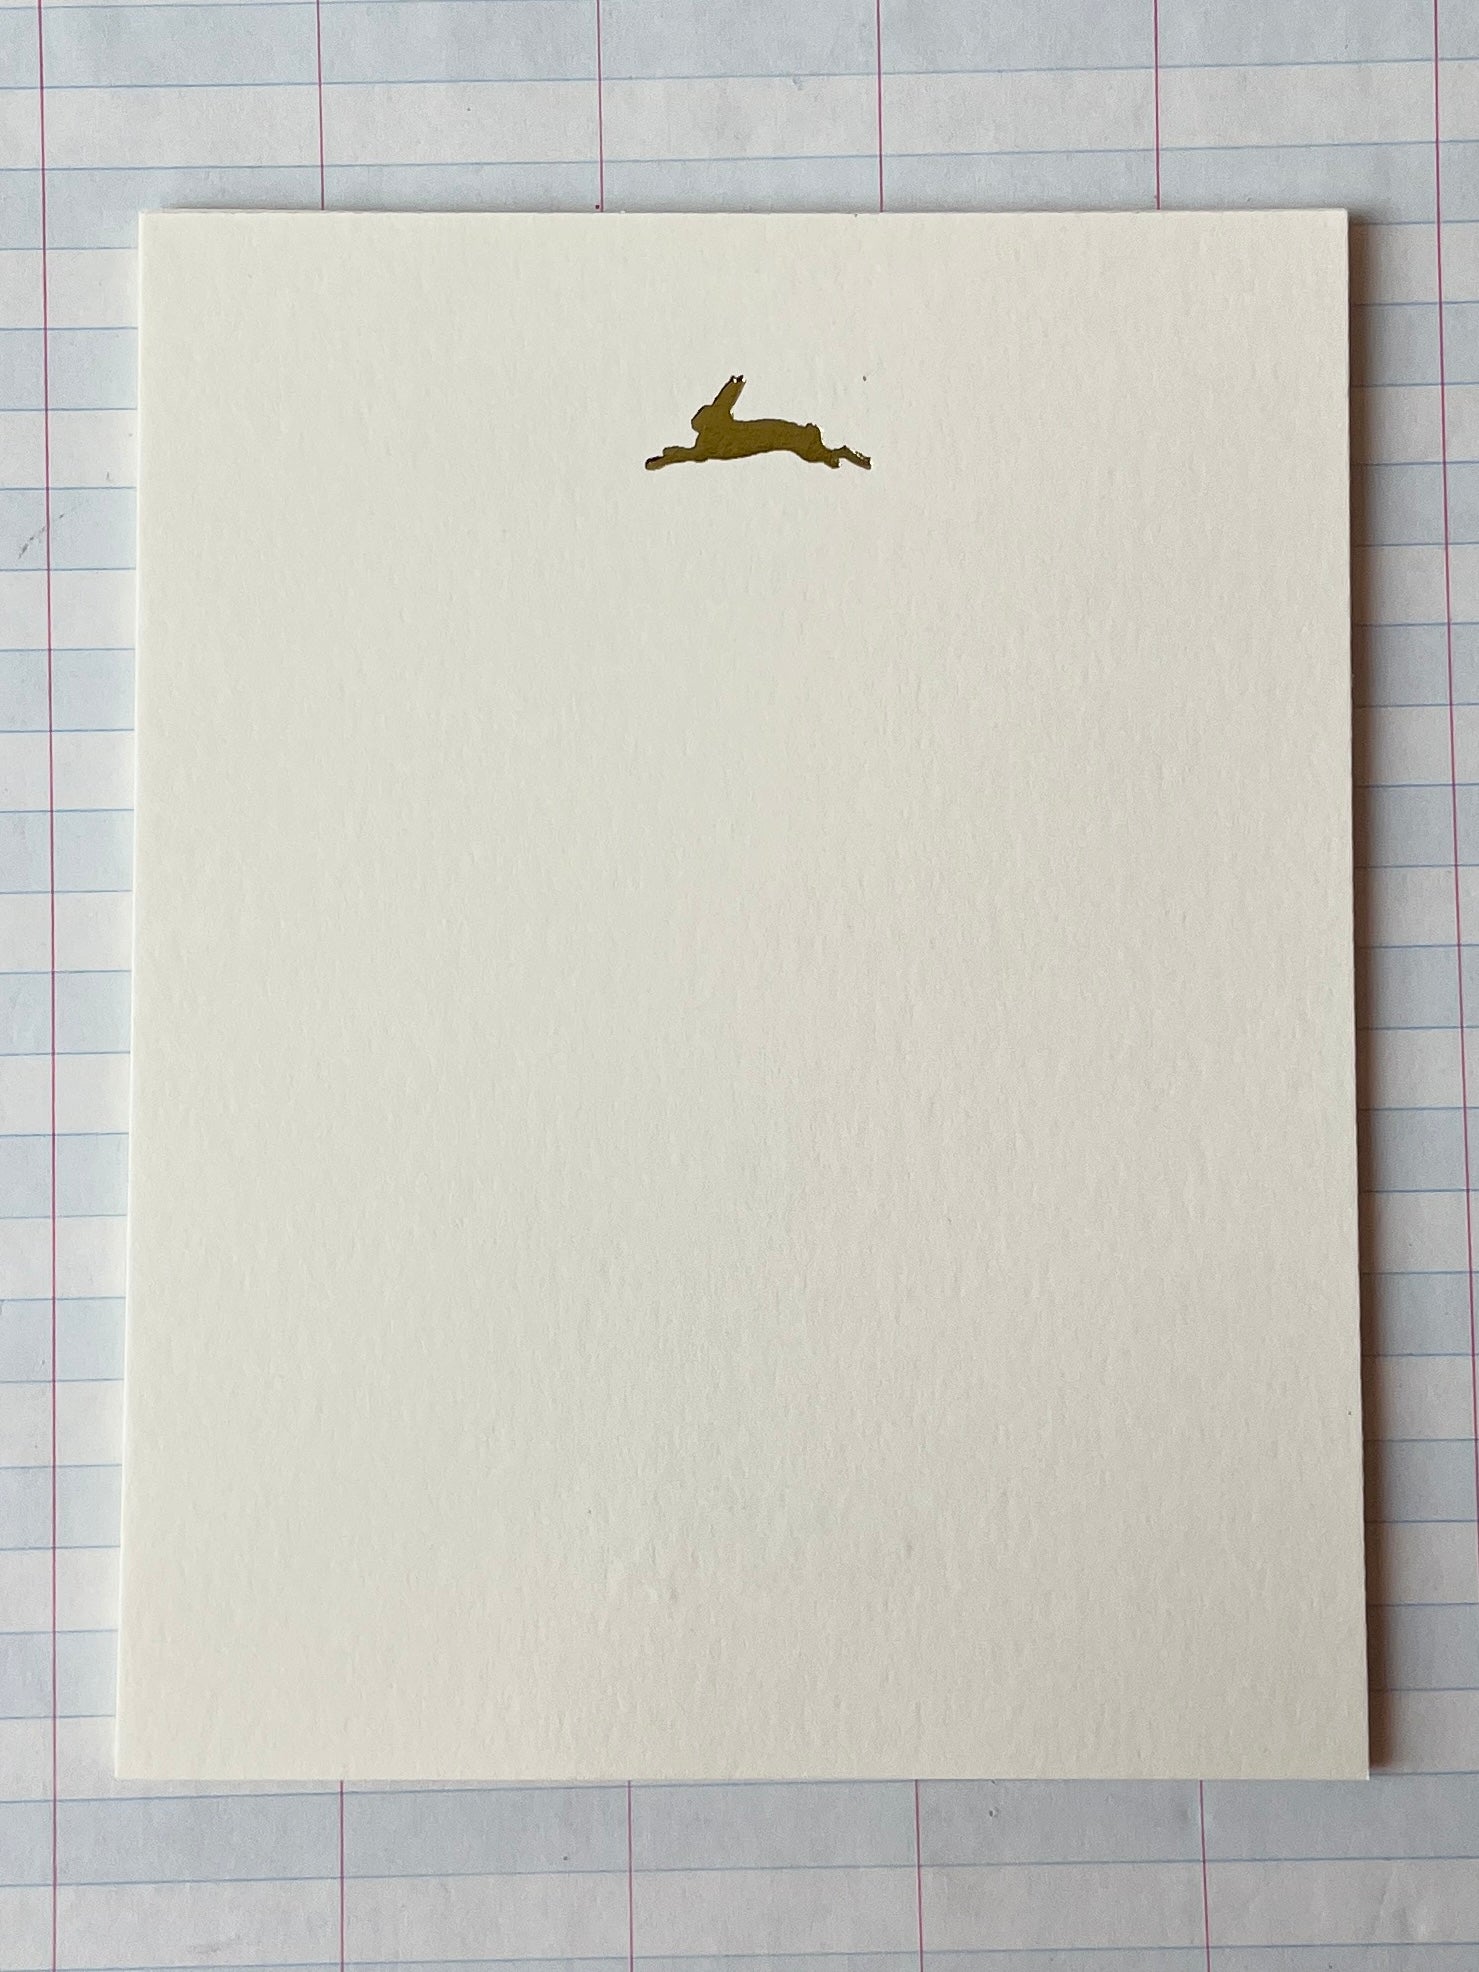 Jumping Hare Foil Pressed Stationery